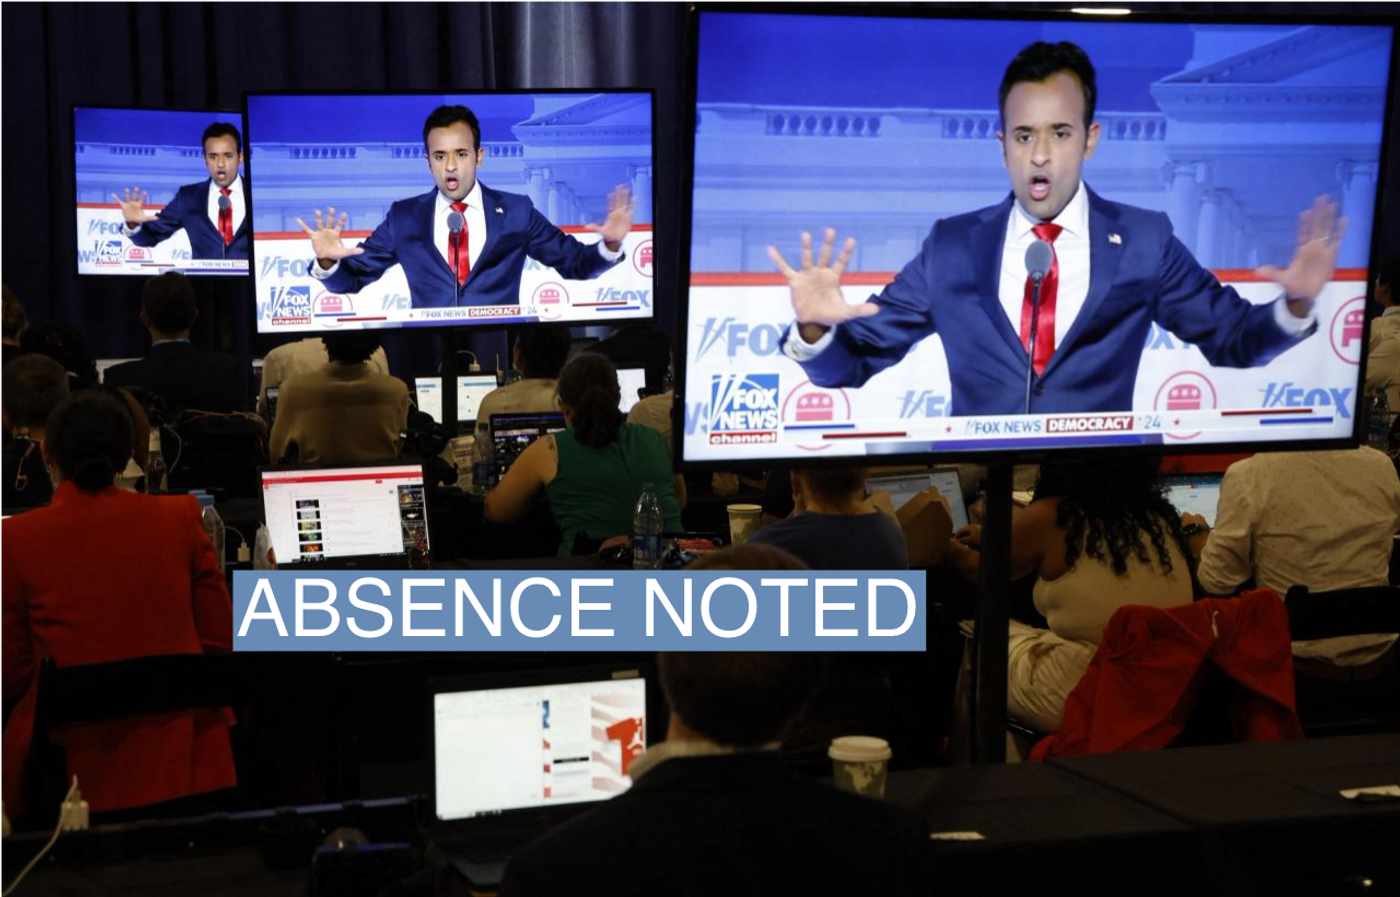 Former biotech executive Vivek Ramaswamy is seen debating on screens in the media filing center at the first Republican candidates' debate of the 2024 U.S. presidential campaign in Milwaukee, Wisconsin, U.S. August 23, 2023. REUTERS/Jonathan Ernst